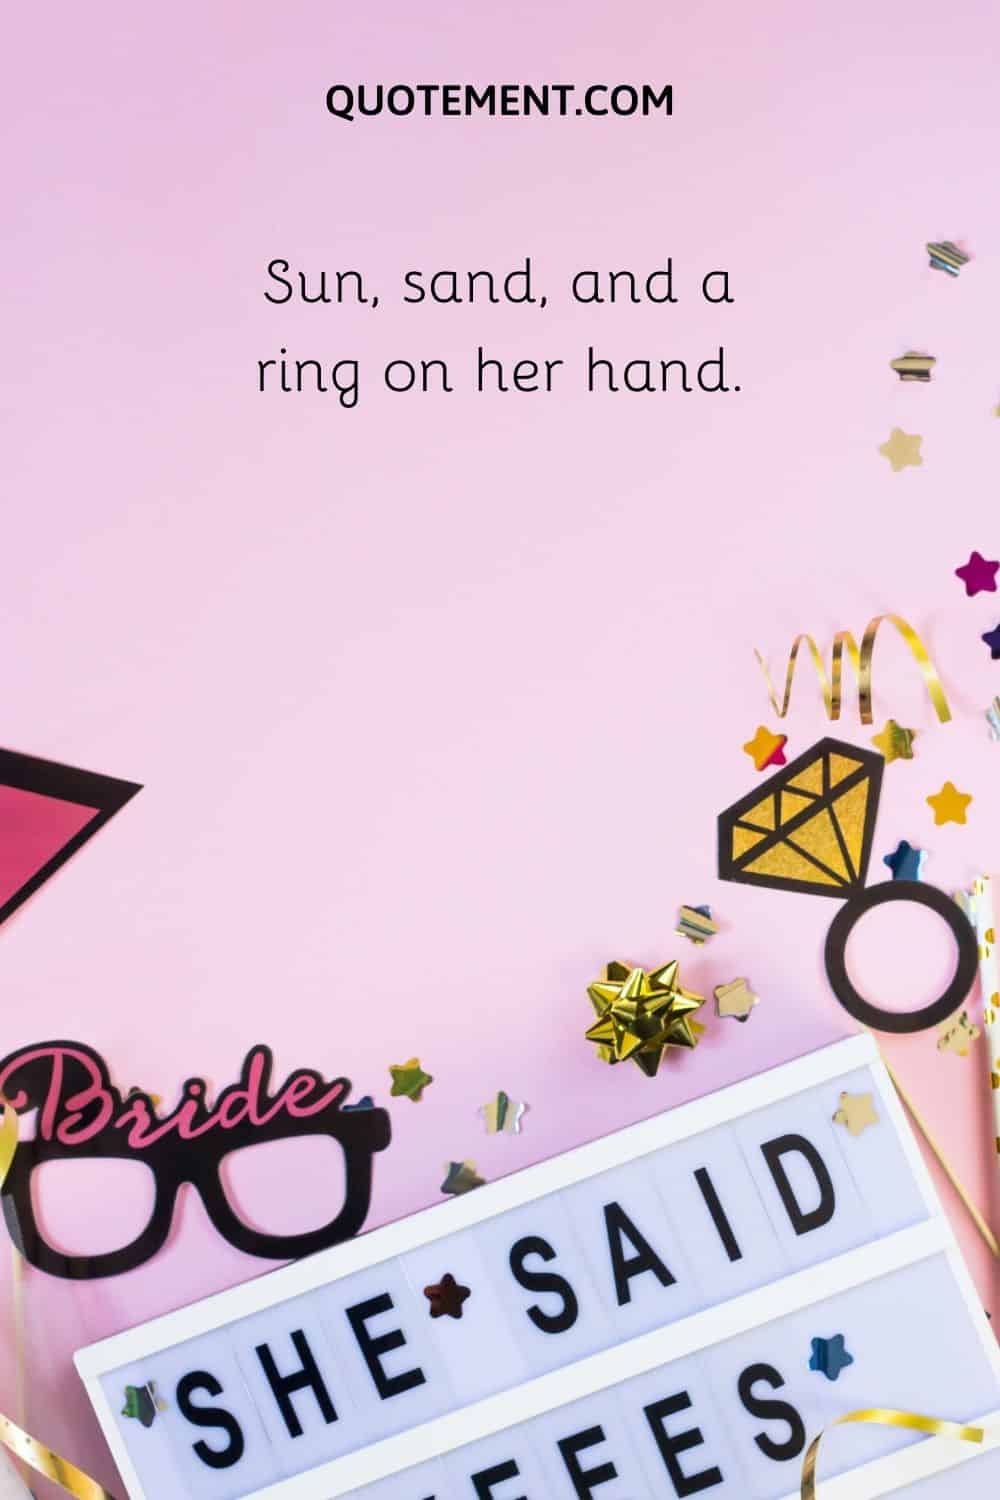 Sun, sand, and a ring on her hand.